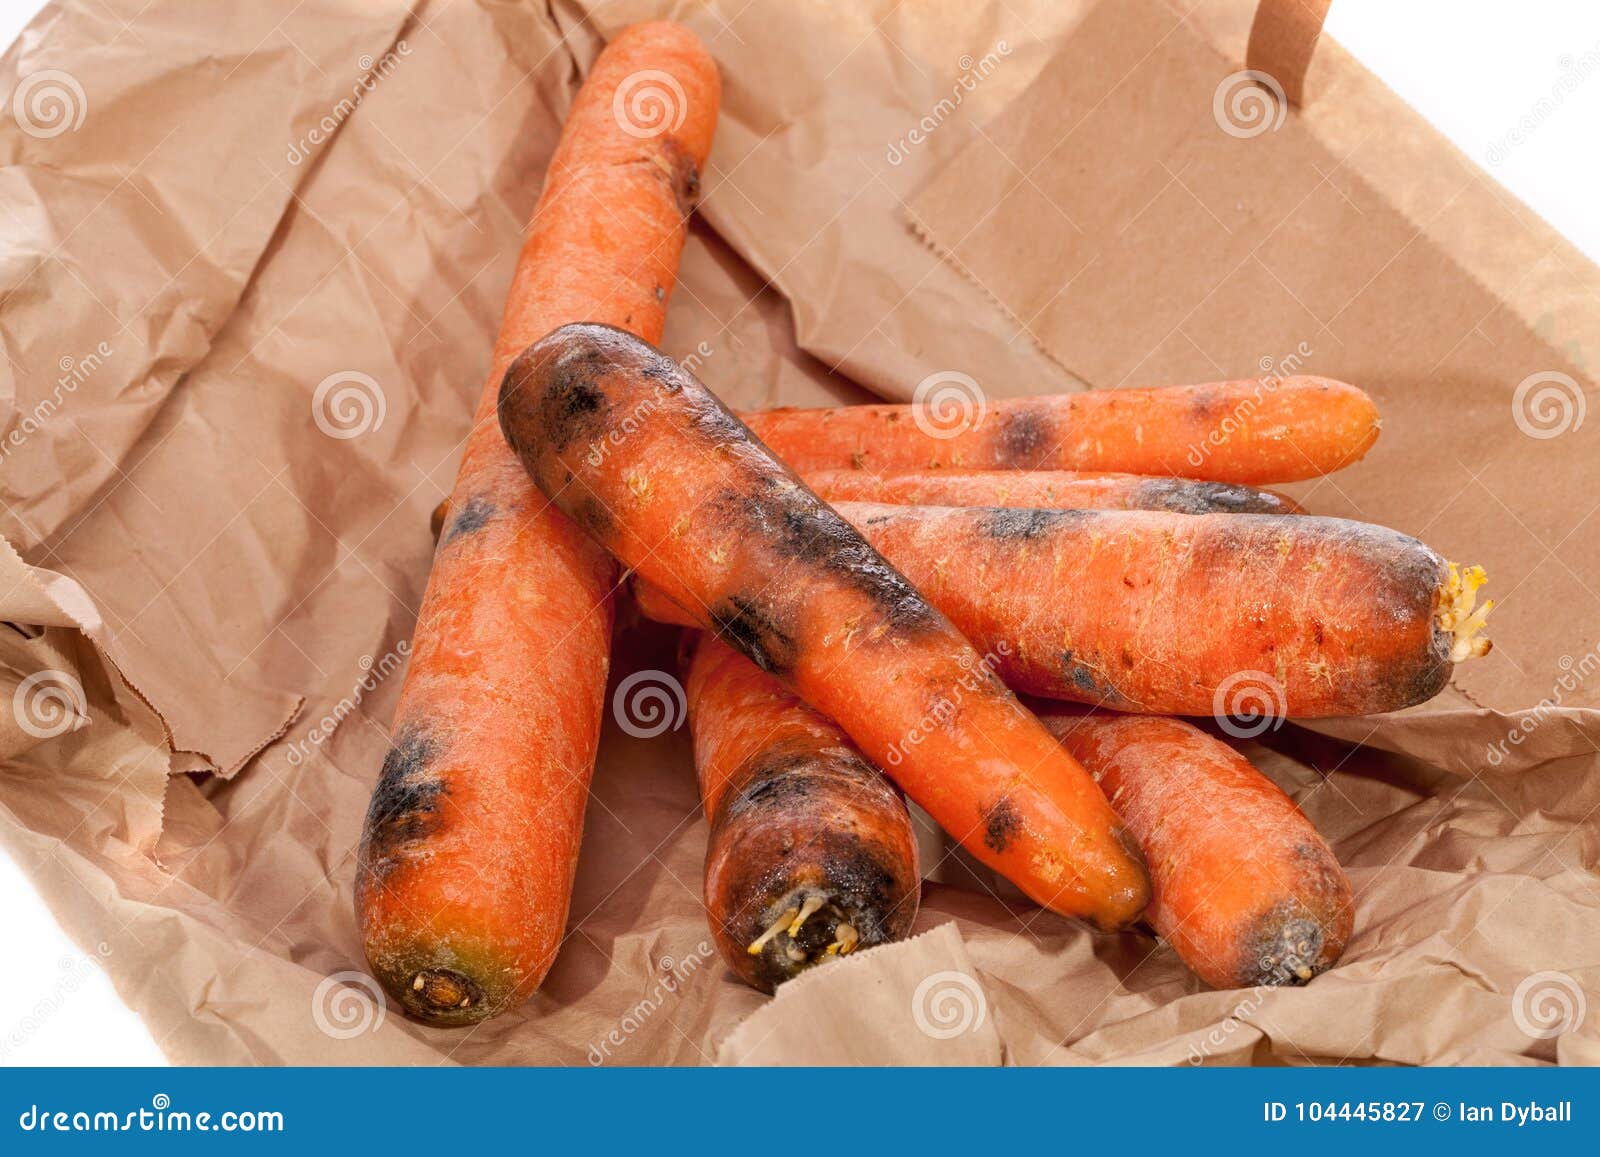 rotten carrots. wasted black and mouldy vegetables. gone off foo